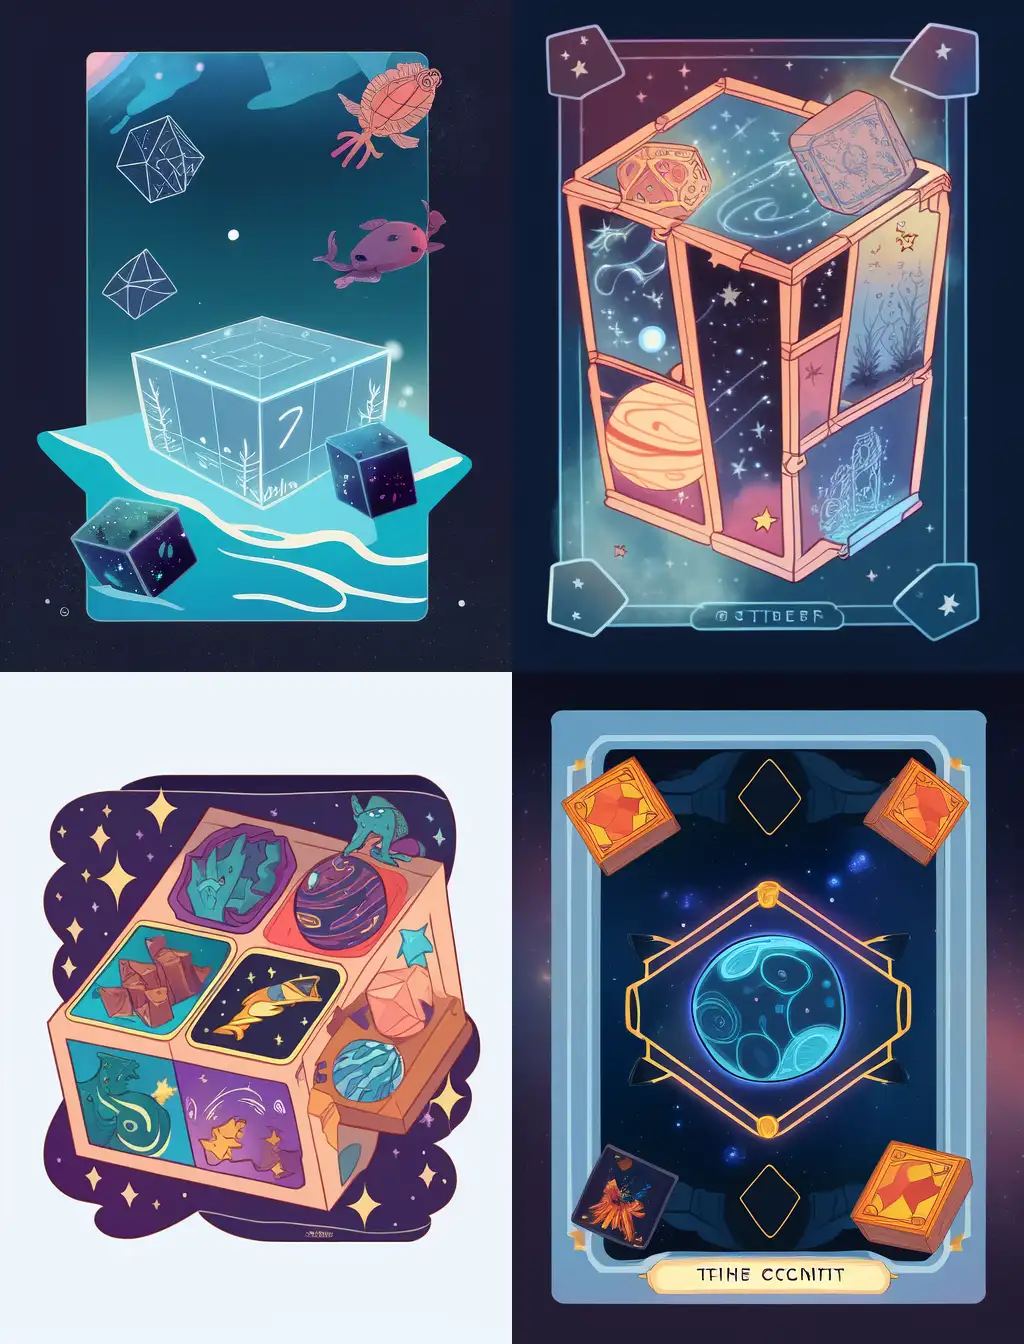 Rectangular-Tarot-Card-Box-with-Zodiac-Signs-Planets-and-Elements